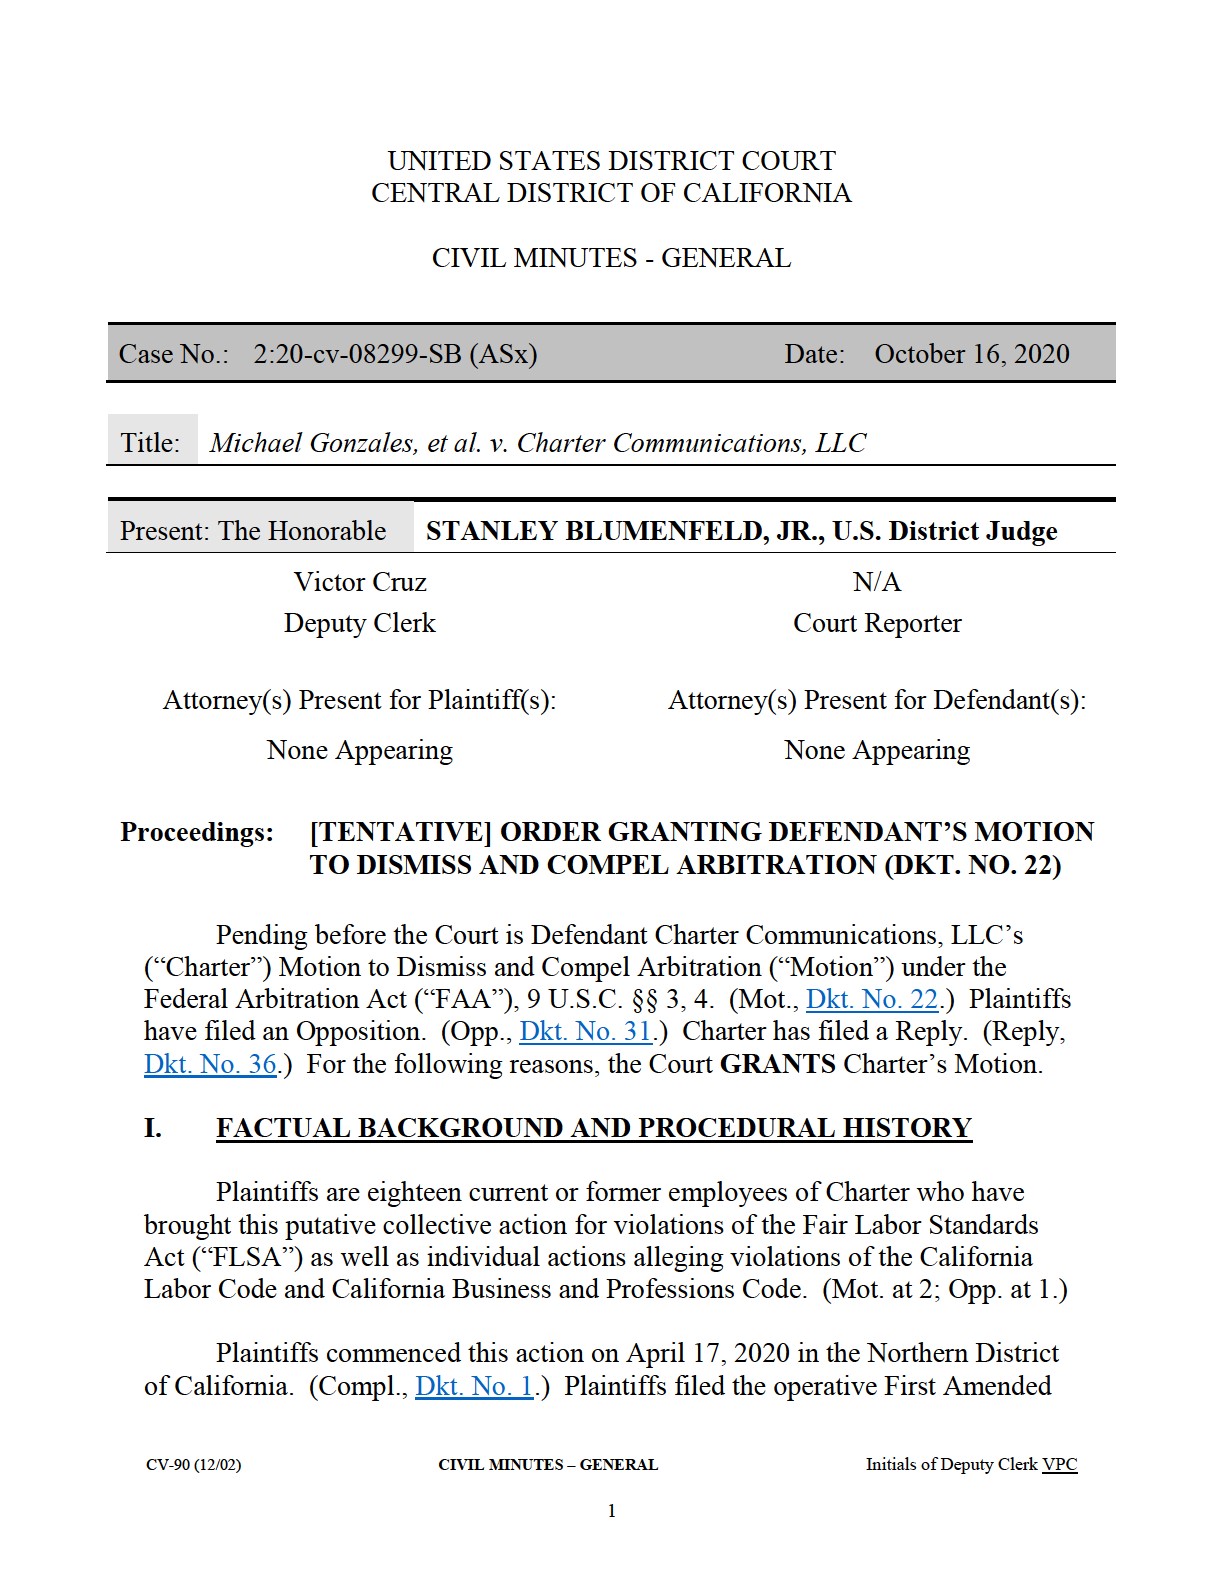 Motion to Dismiss and Compel Arbitration (Judge Stanley Blumenfeld